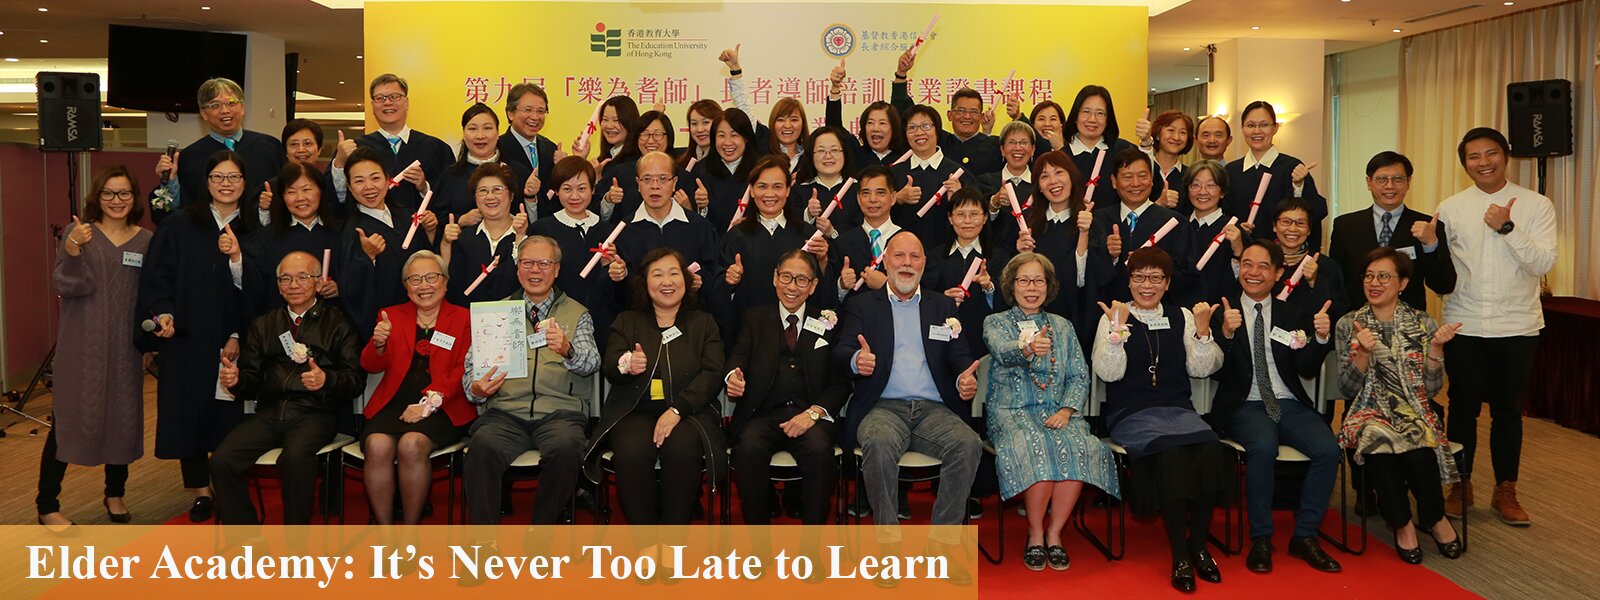 Elder Academy: It's Never Too Late to Learn